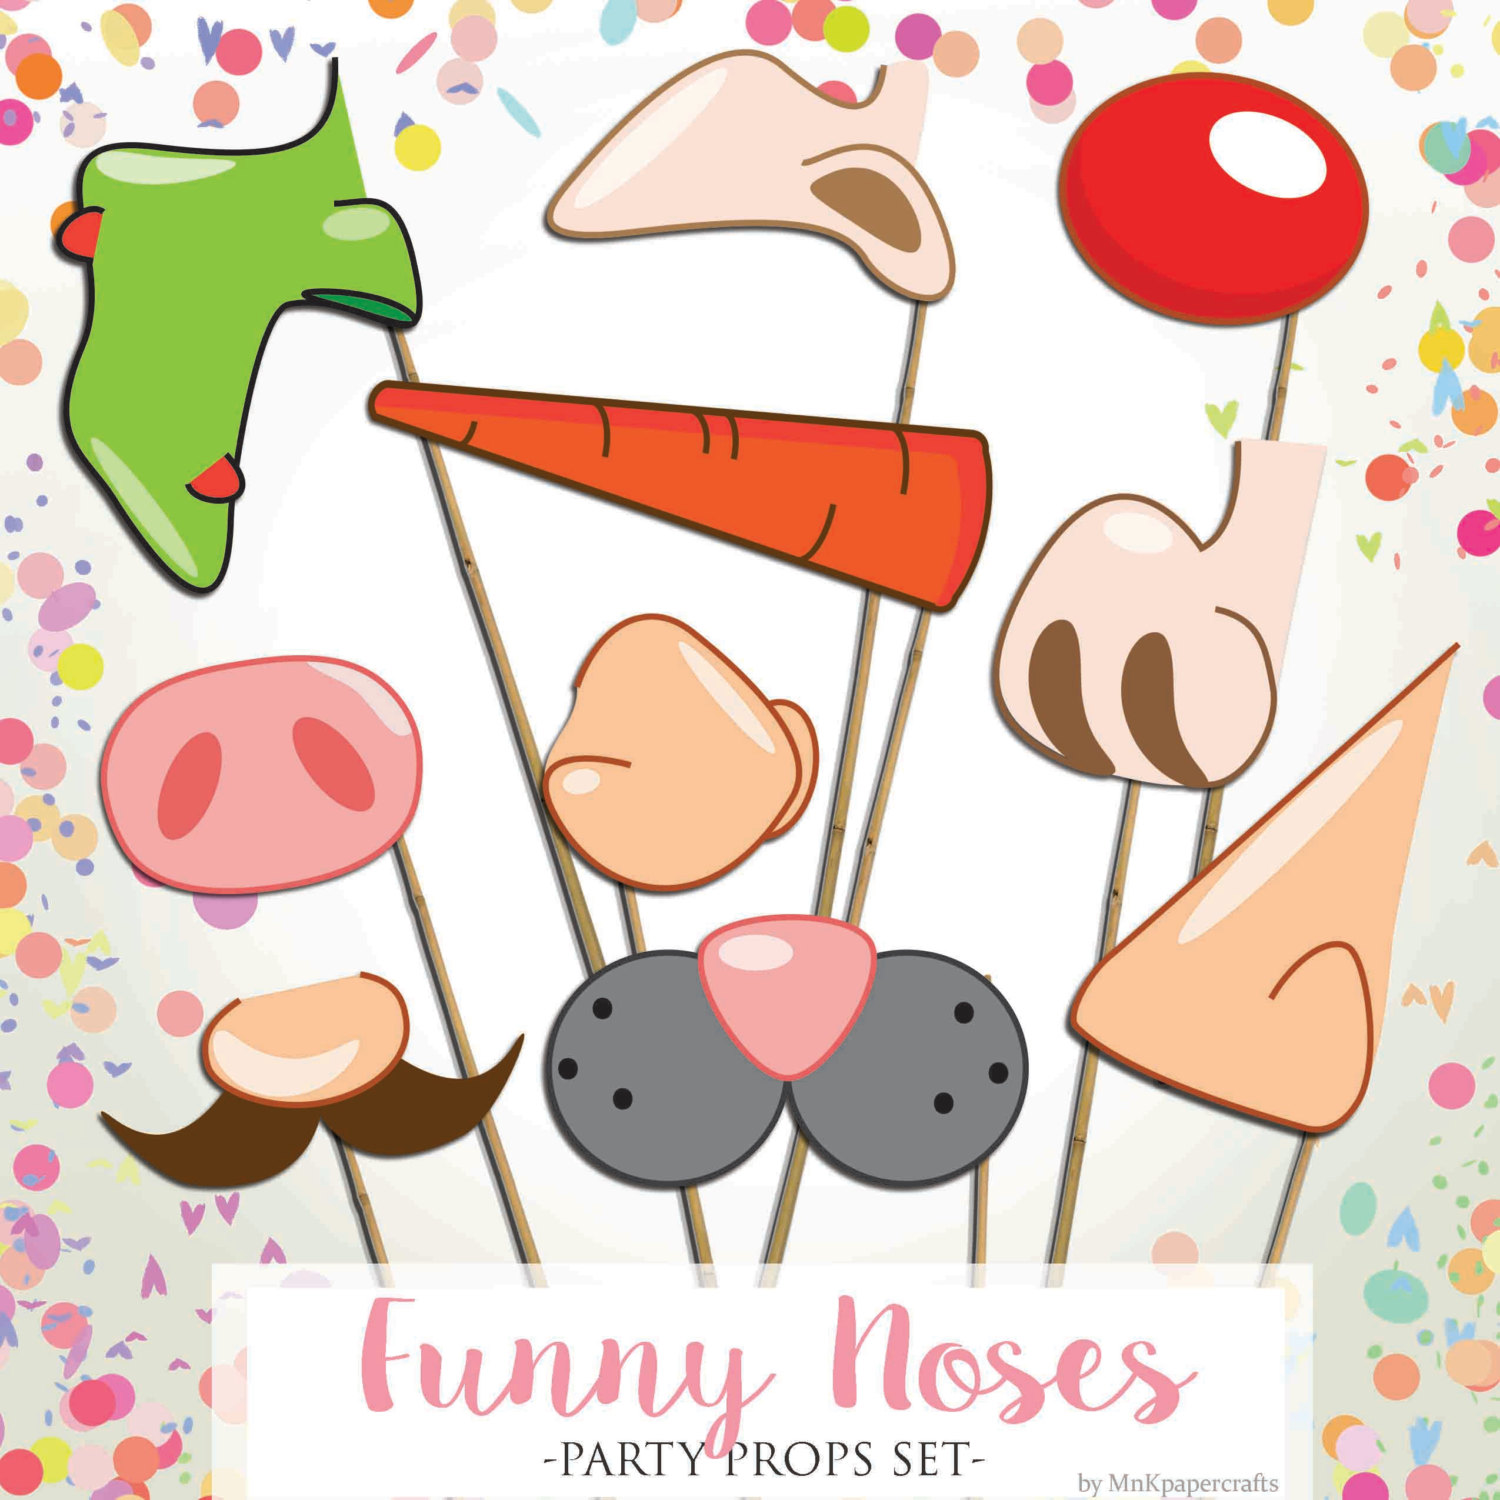 Funny Noses Printable Party Props Set Photo by MnKpapercrafts 